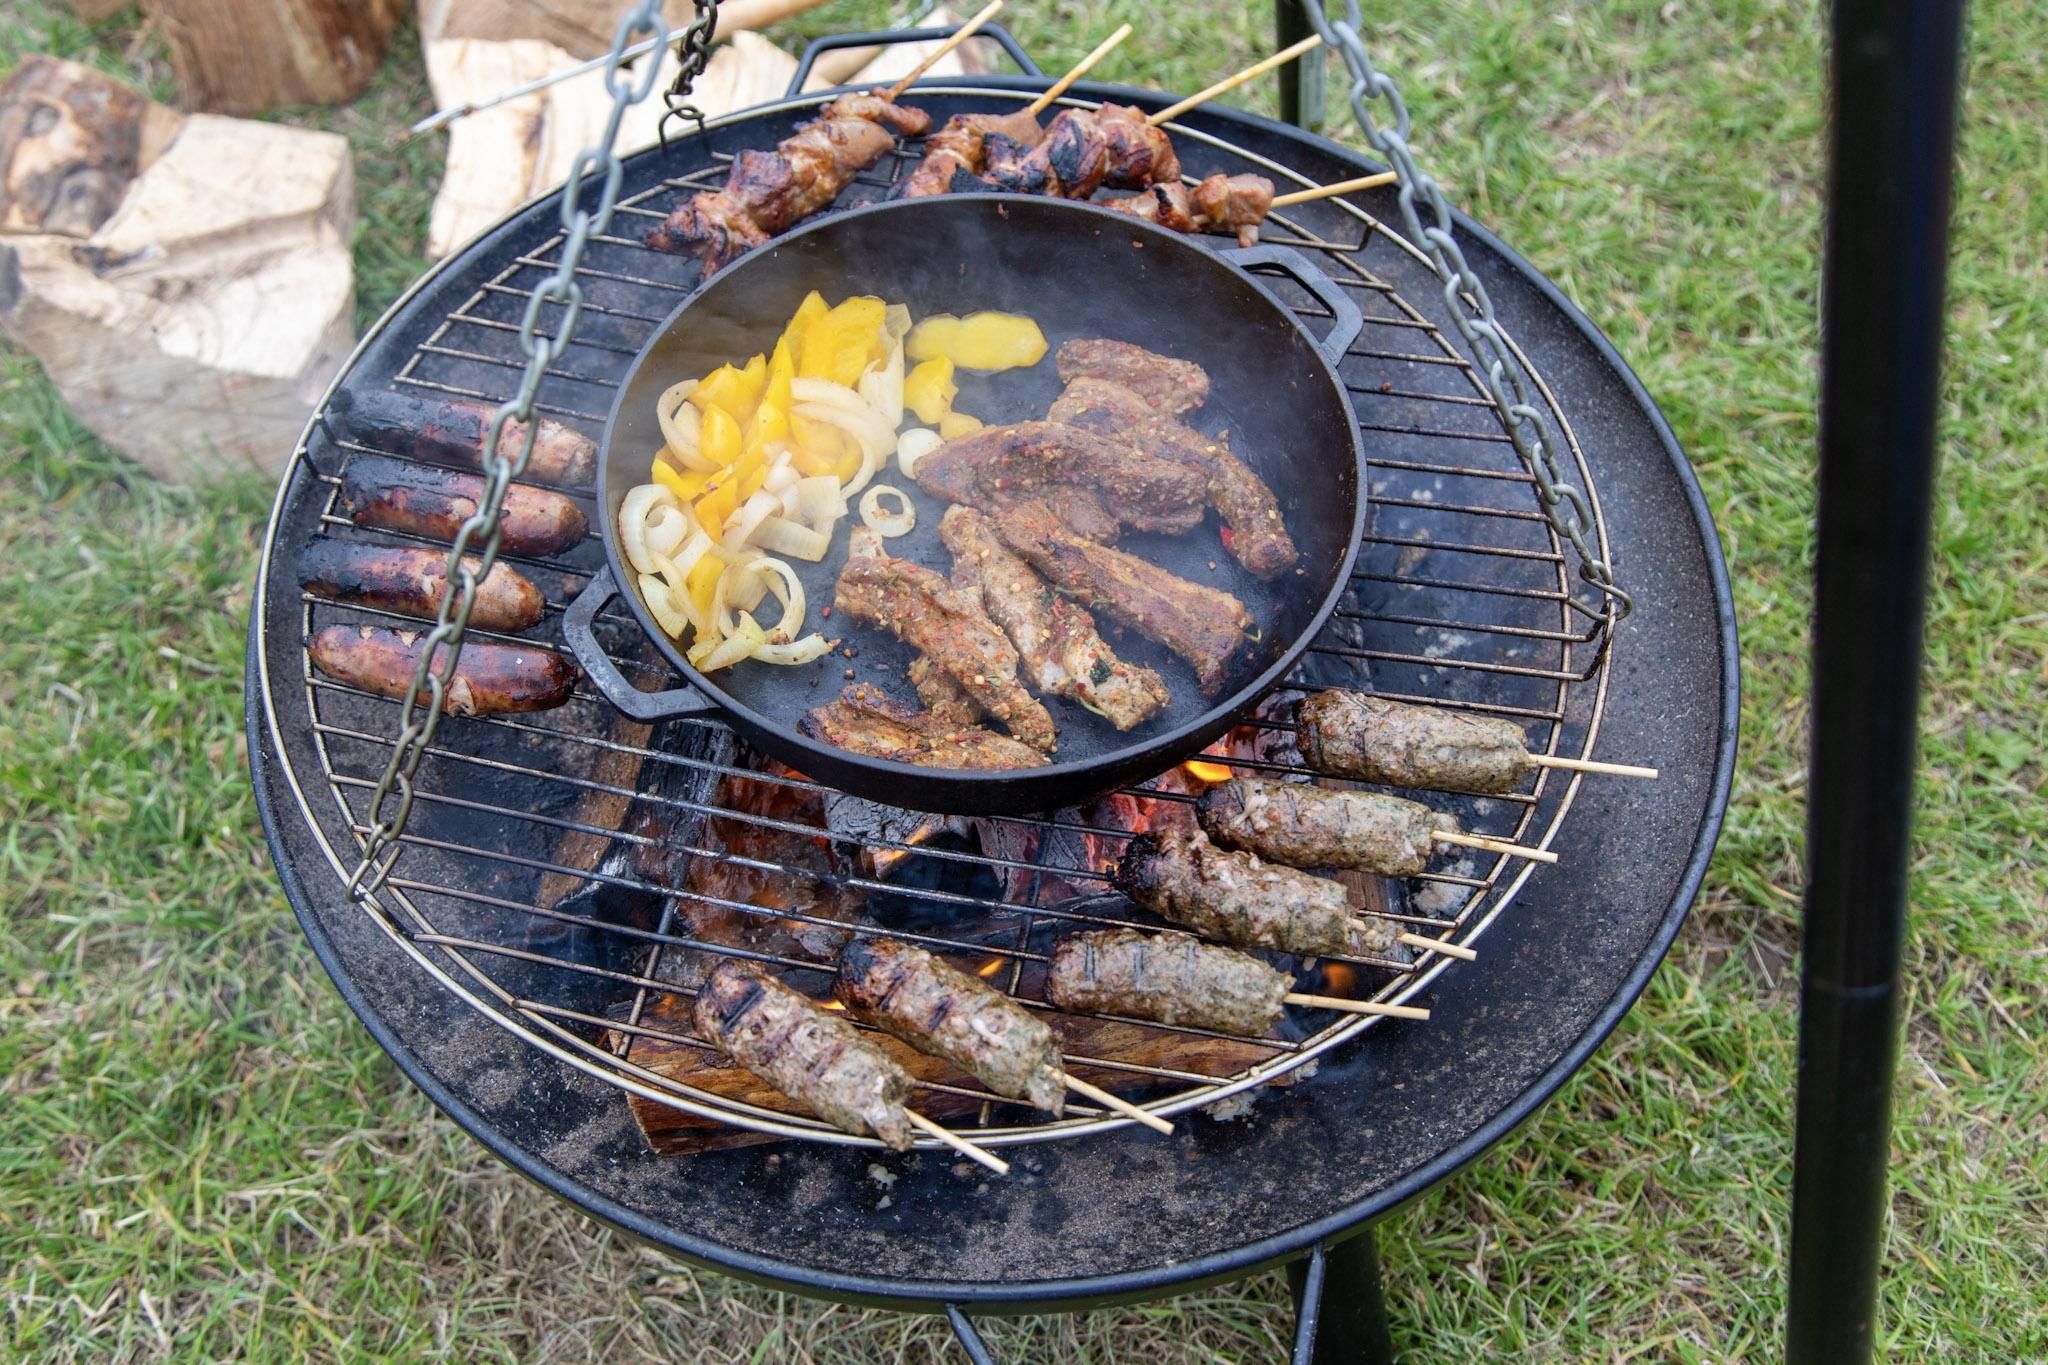 enjoy cooking on your own bbq here at Go Wild glamping